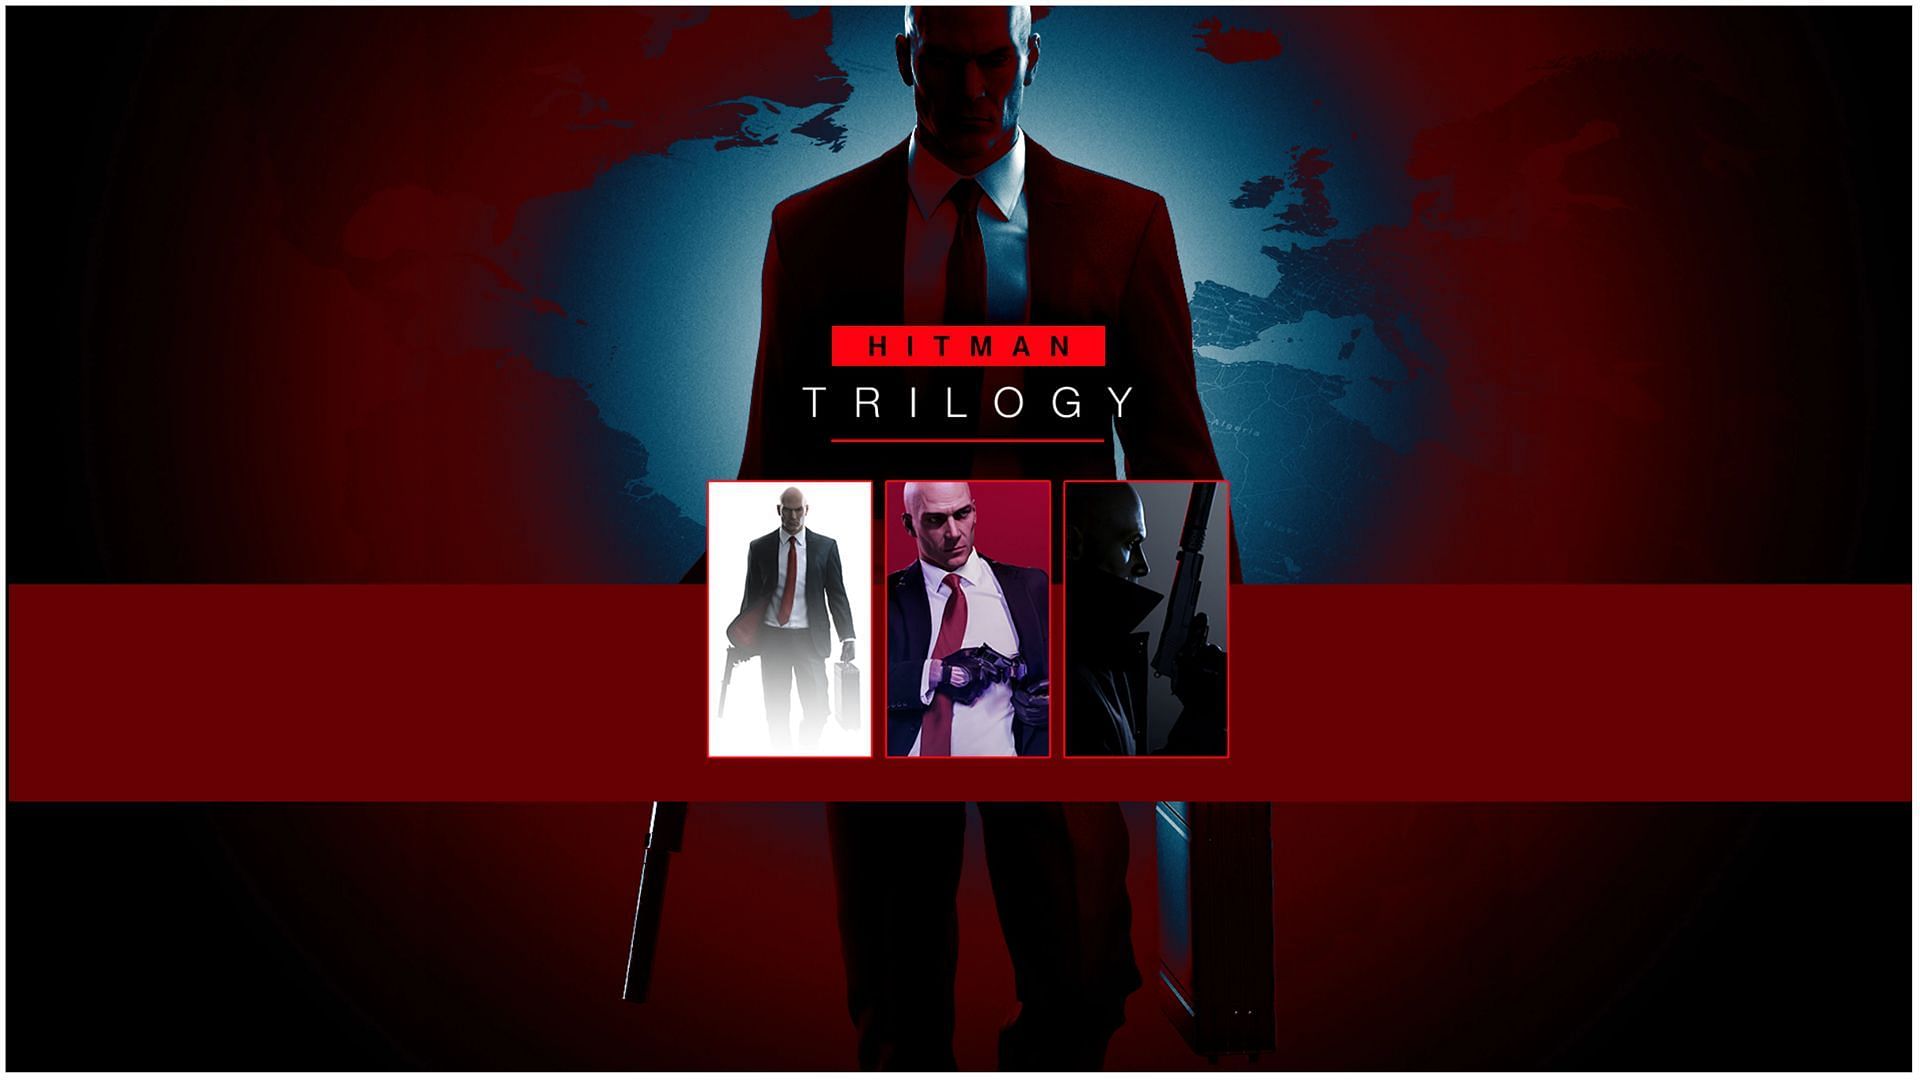 The Hitman Trilogy is the most recent installment in the long-running stealth game series (Image via IO Interactive)